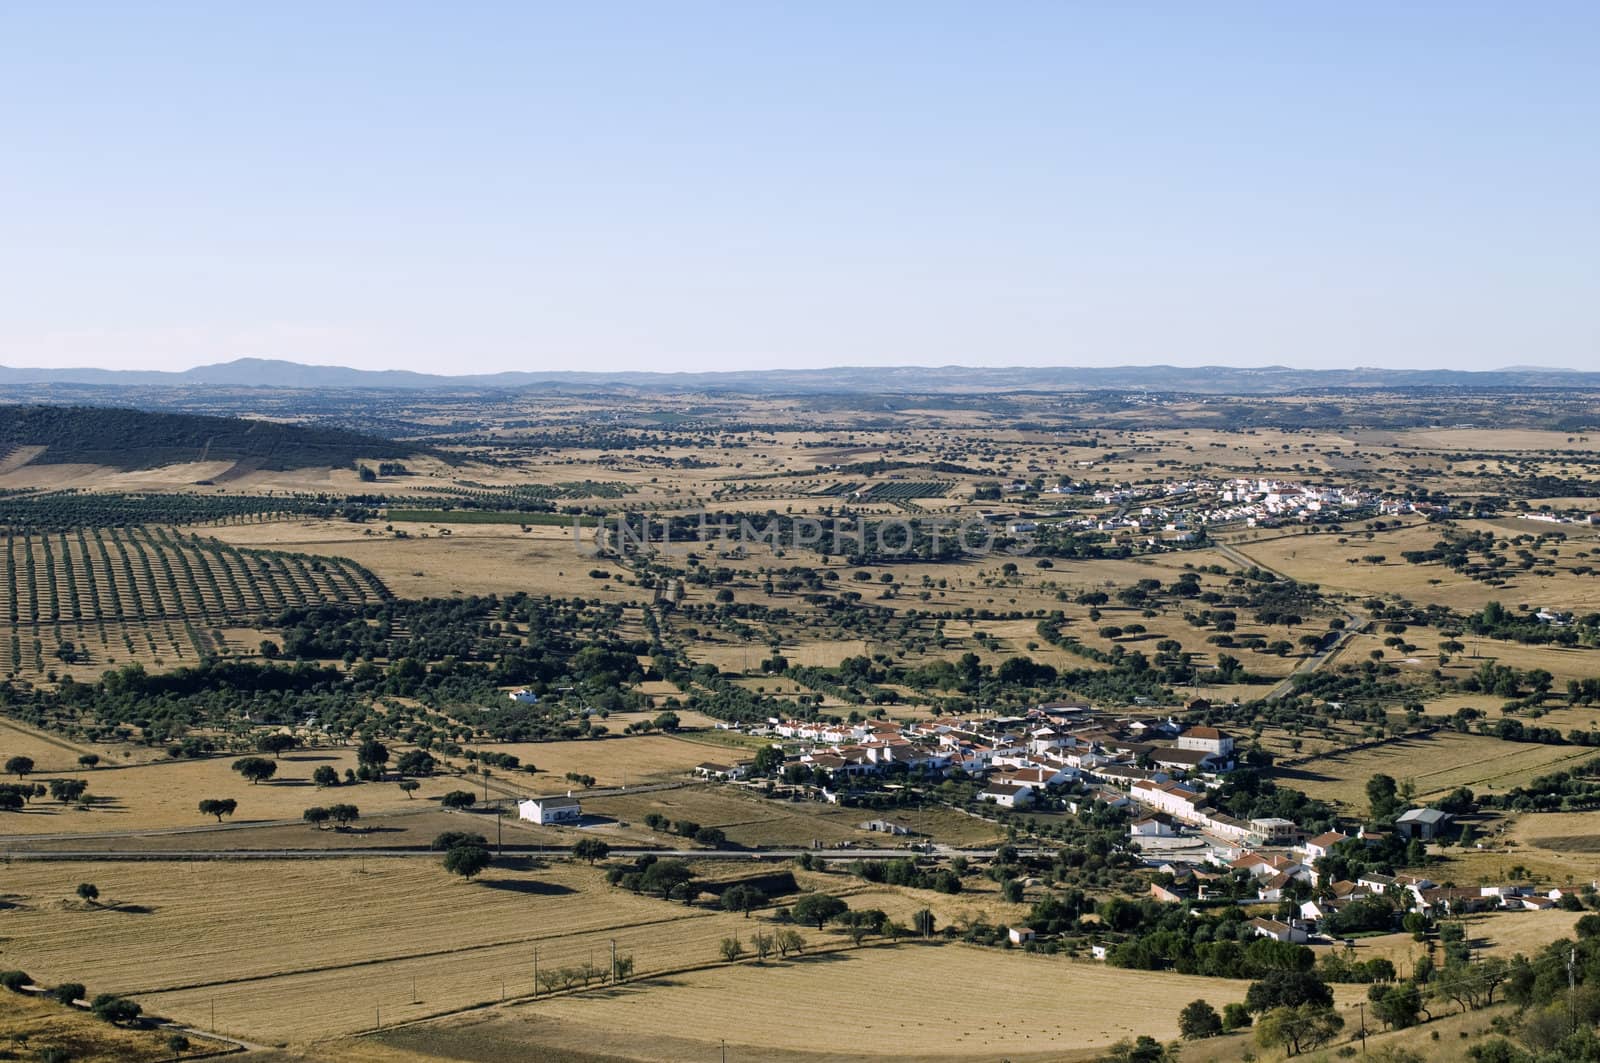 Landscape of Alentejo region, viewed from the village of Monsaraz, Portugal.
Villages of Telheiro and Outeiro, in the foreground.